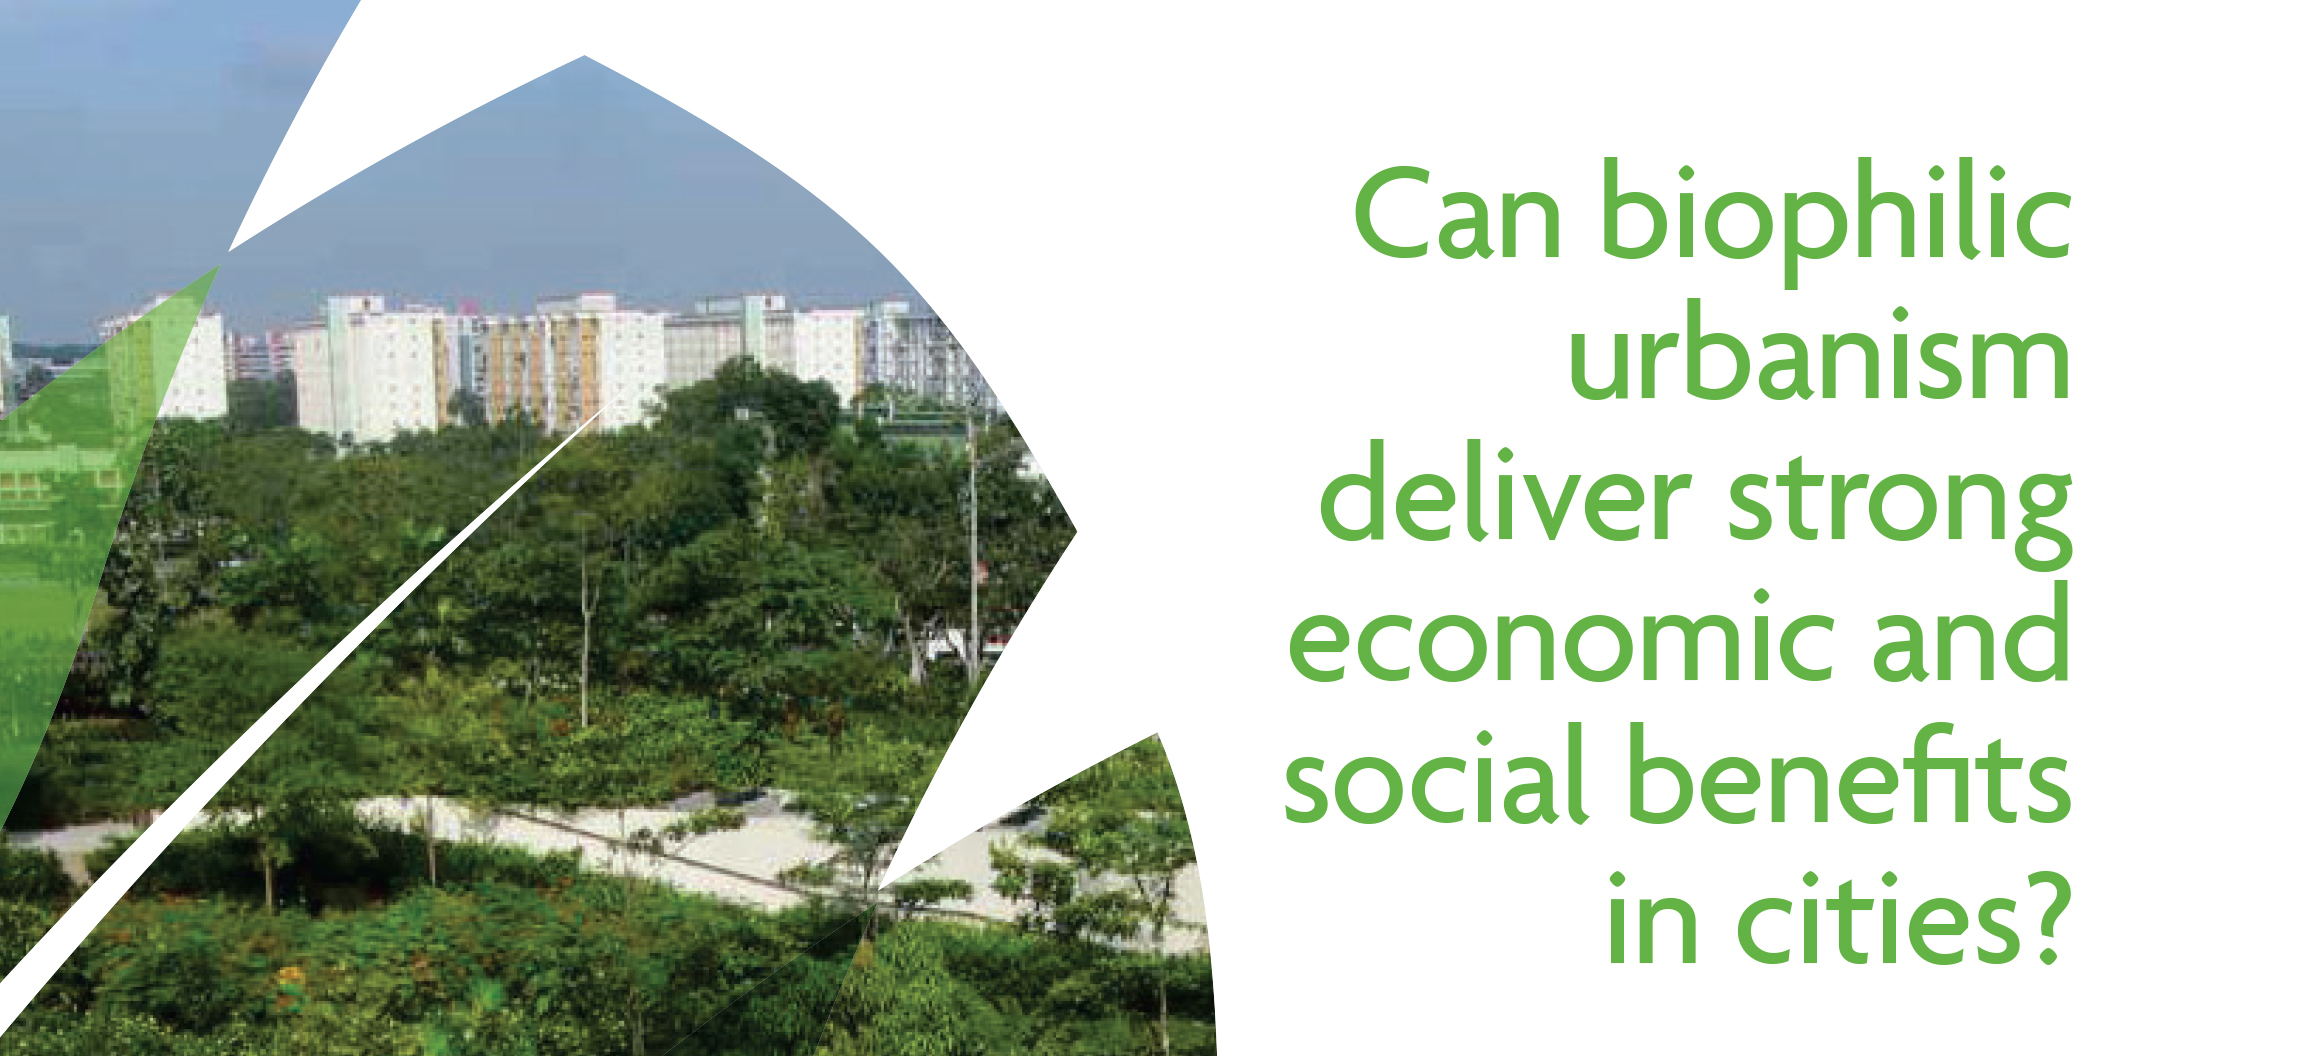 Can Biophilic Urbanism Deliver Strong Economic & Social Benefits in